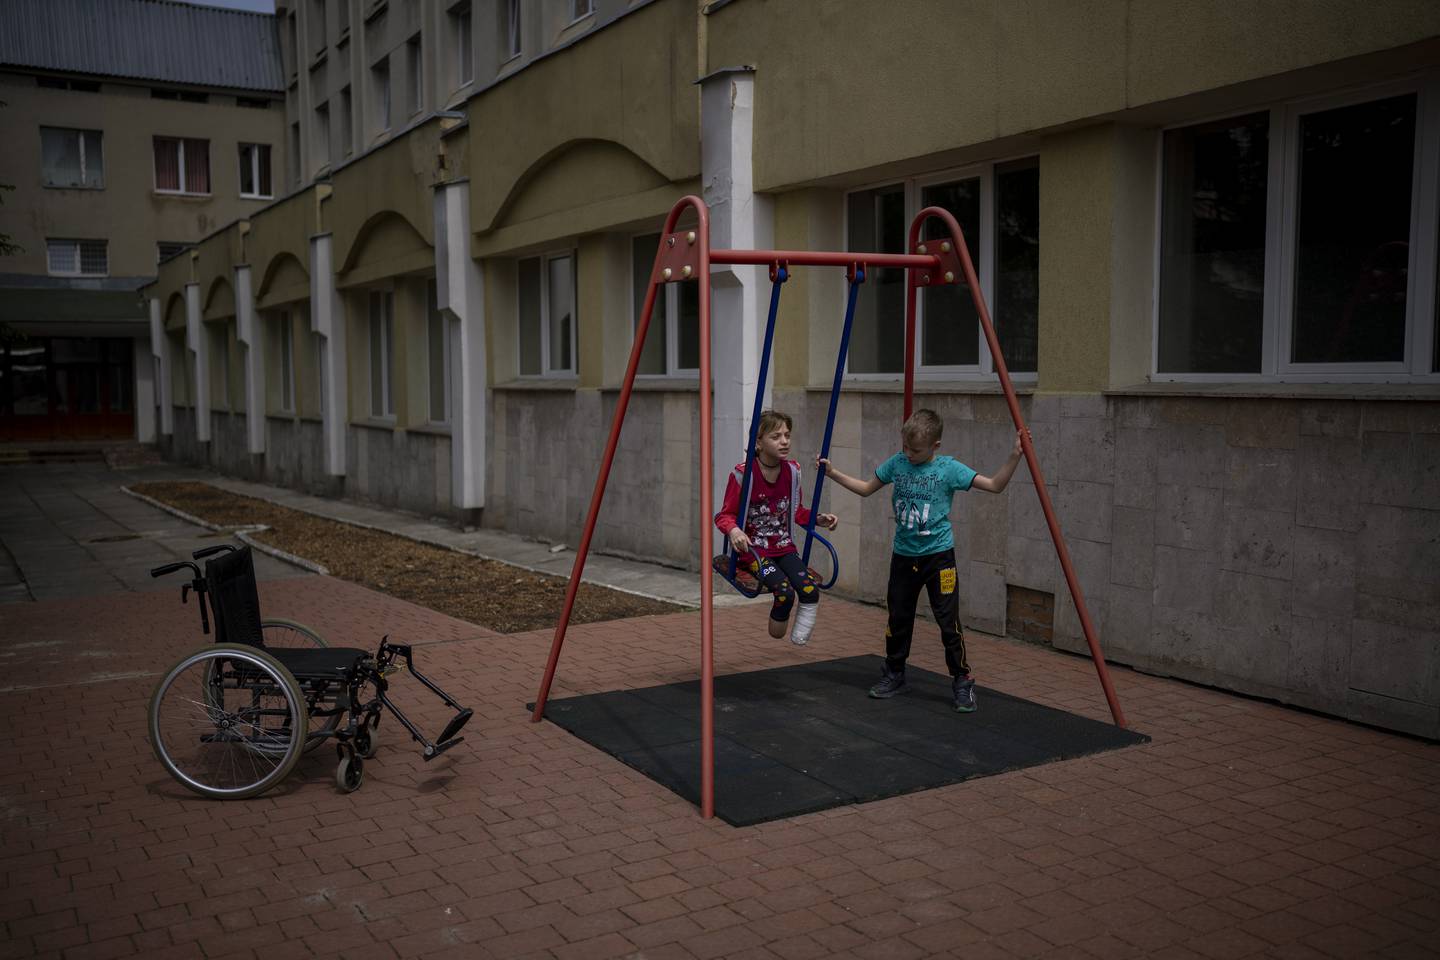 Yarik Stepanenko, 11, pushes his twin-sister Yana on a swing outside a public hospital in Lviv, Ukraine, Thursday, May 12, 2022. On April 8, a missile struck the train station in the eastern city of Kramatorsk where Yana, Yarik and their mother Natasha were planning to catch an evacuation train heading west and, they hoped, to safety. Yana lost two legs, one just above the ankle, the other higher up her shin. Natasha lost her left leg below the knee. Yarik, left at the station in the chaos of the attack, was uninjured and has been reunited with his mother and sister. (AP Photo/Emilio Morenatti)